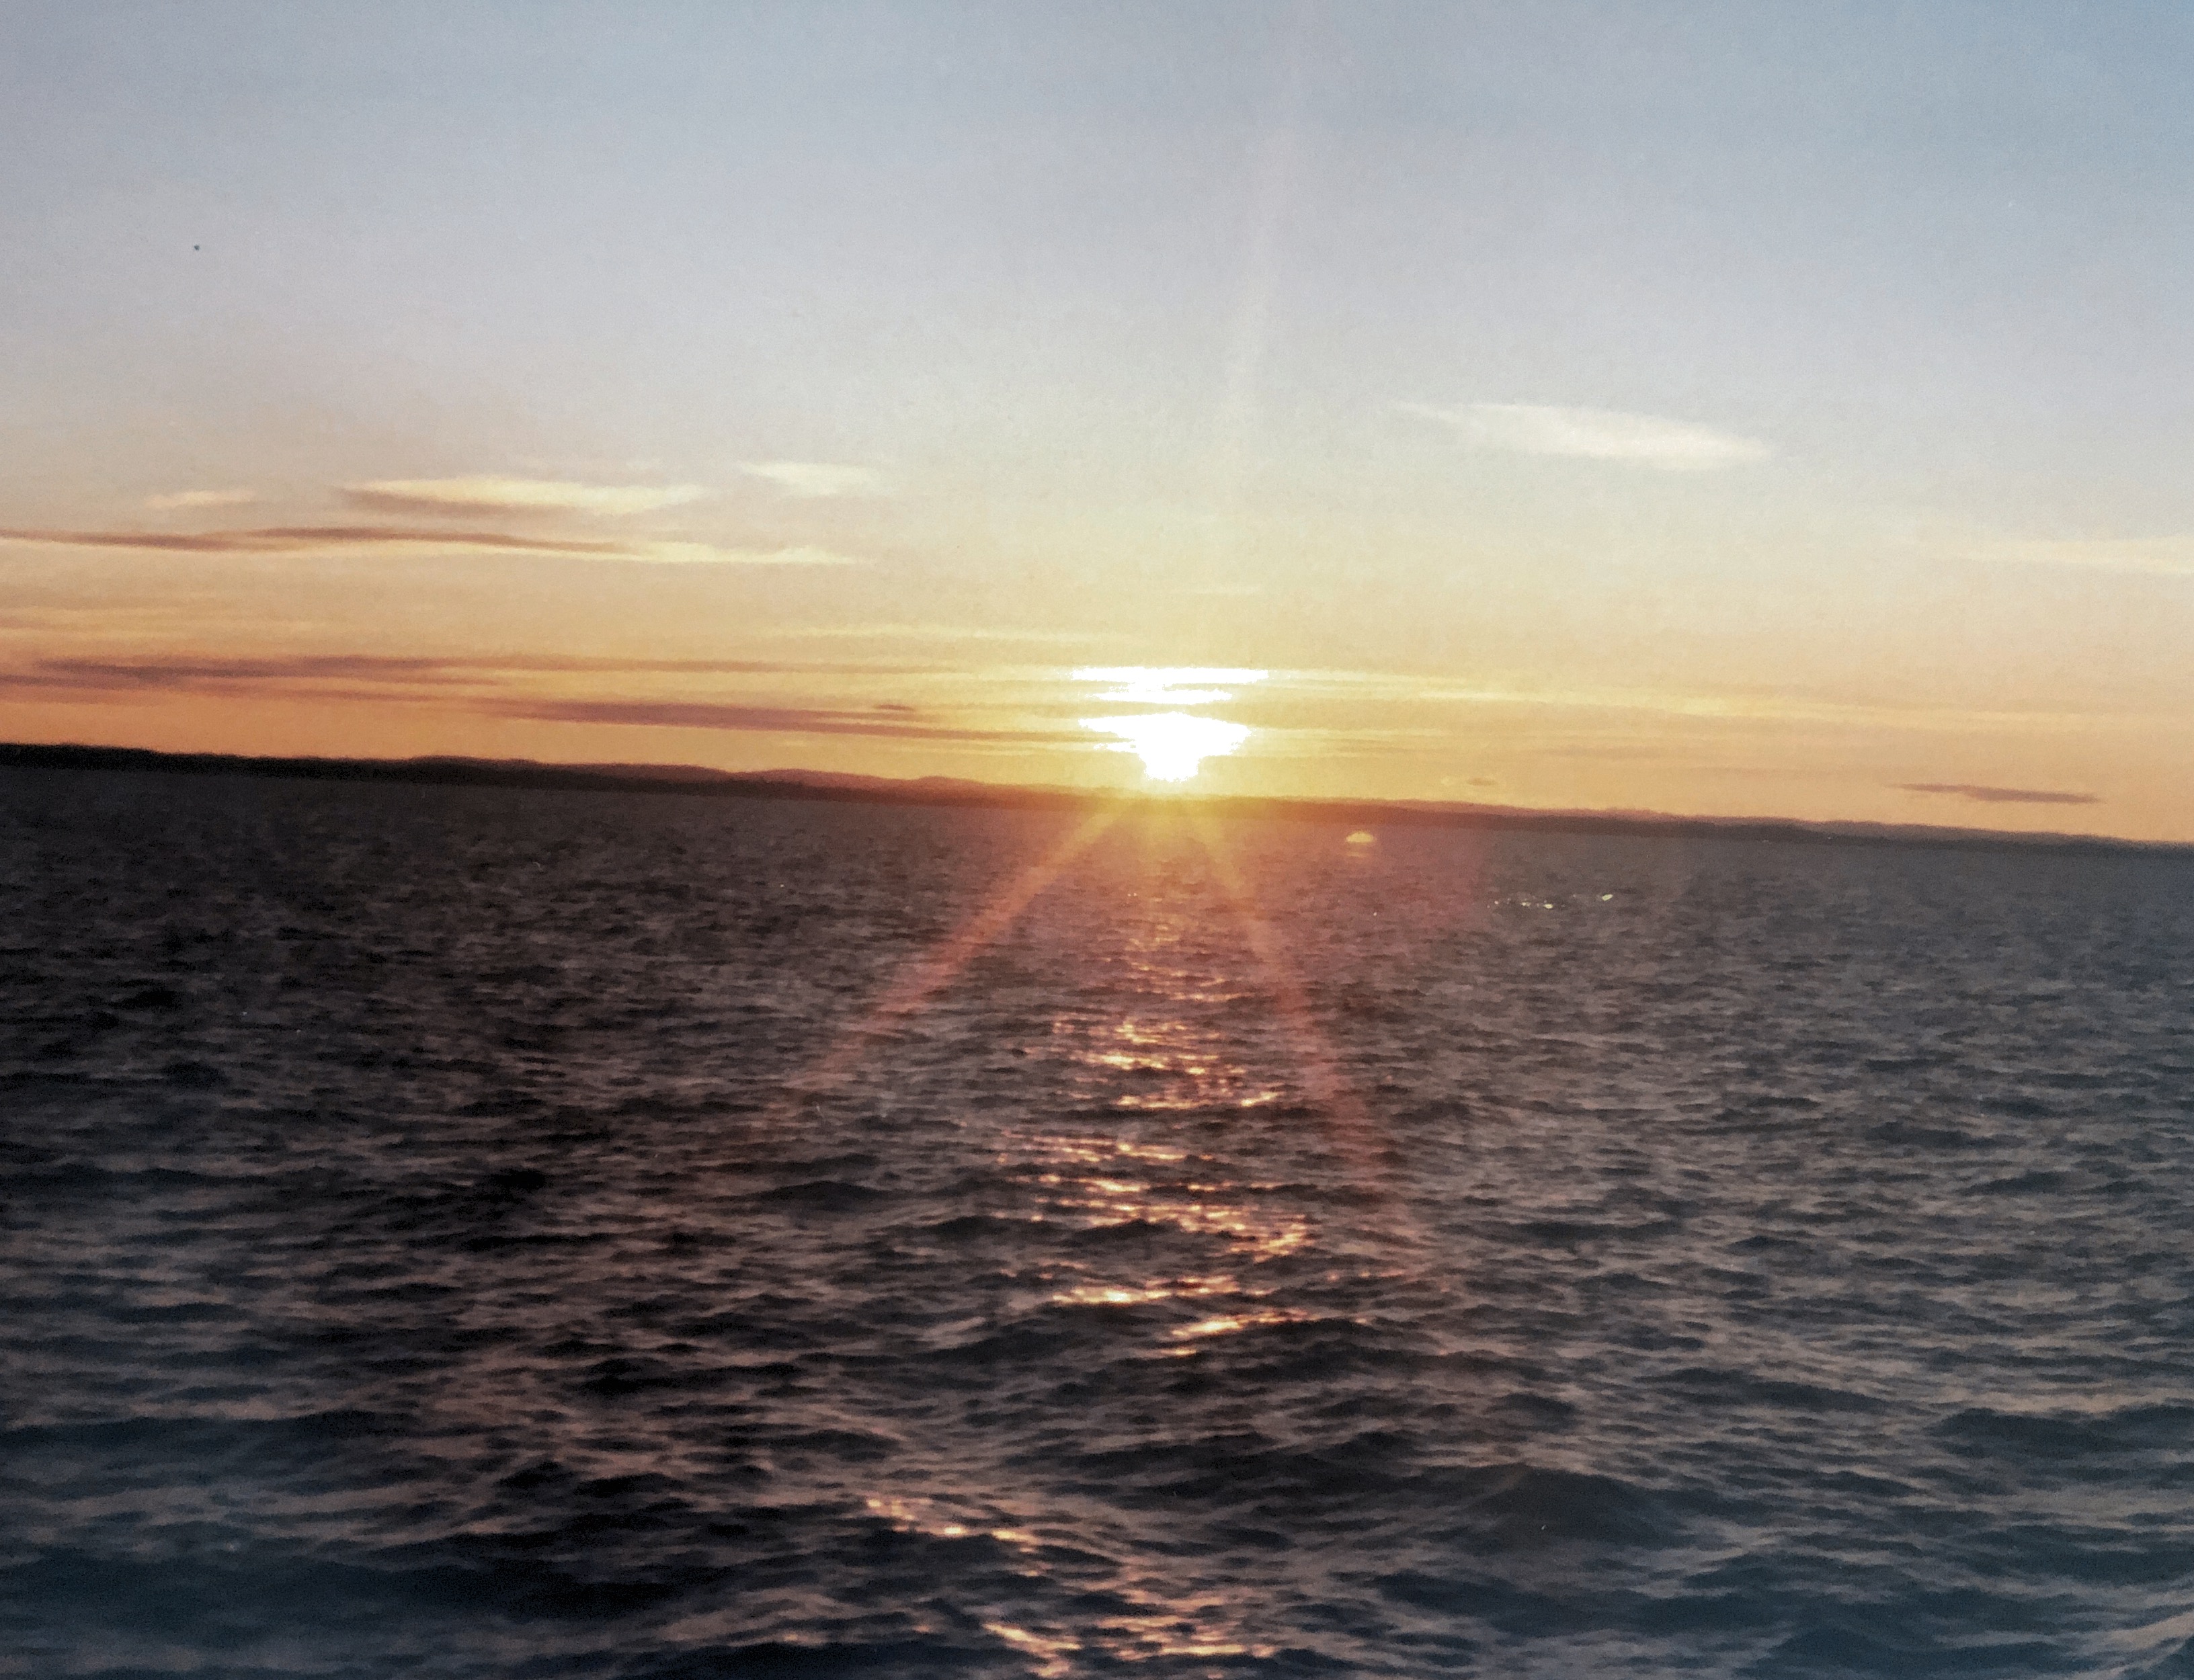 Somewhere between Norway and Denmark
August 1977